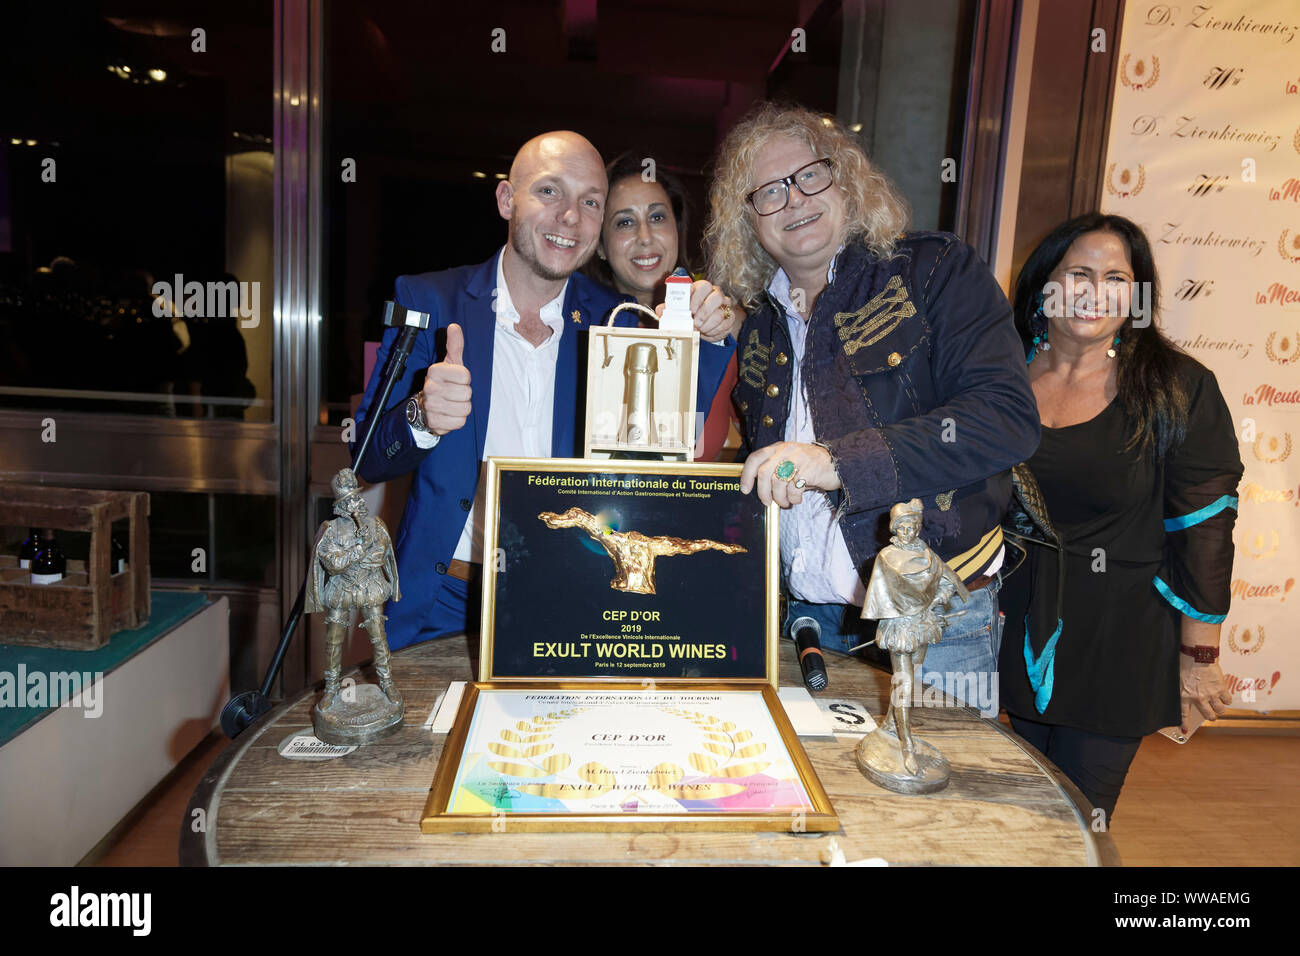 Paris, France. 13th Sep, 2019. Jean Eric De Saint Luc, President of the International Federation of Tourism awarded the CEP d'OR to David Zienkiewicz. Stock Photo